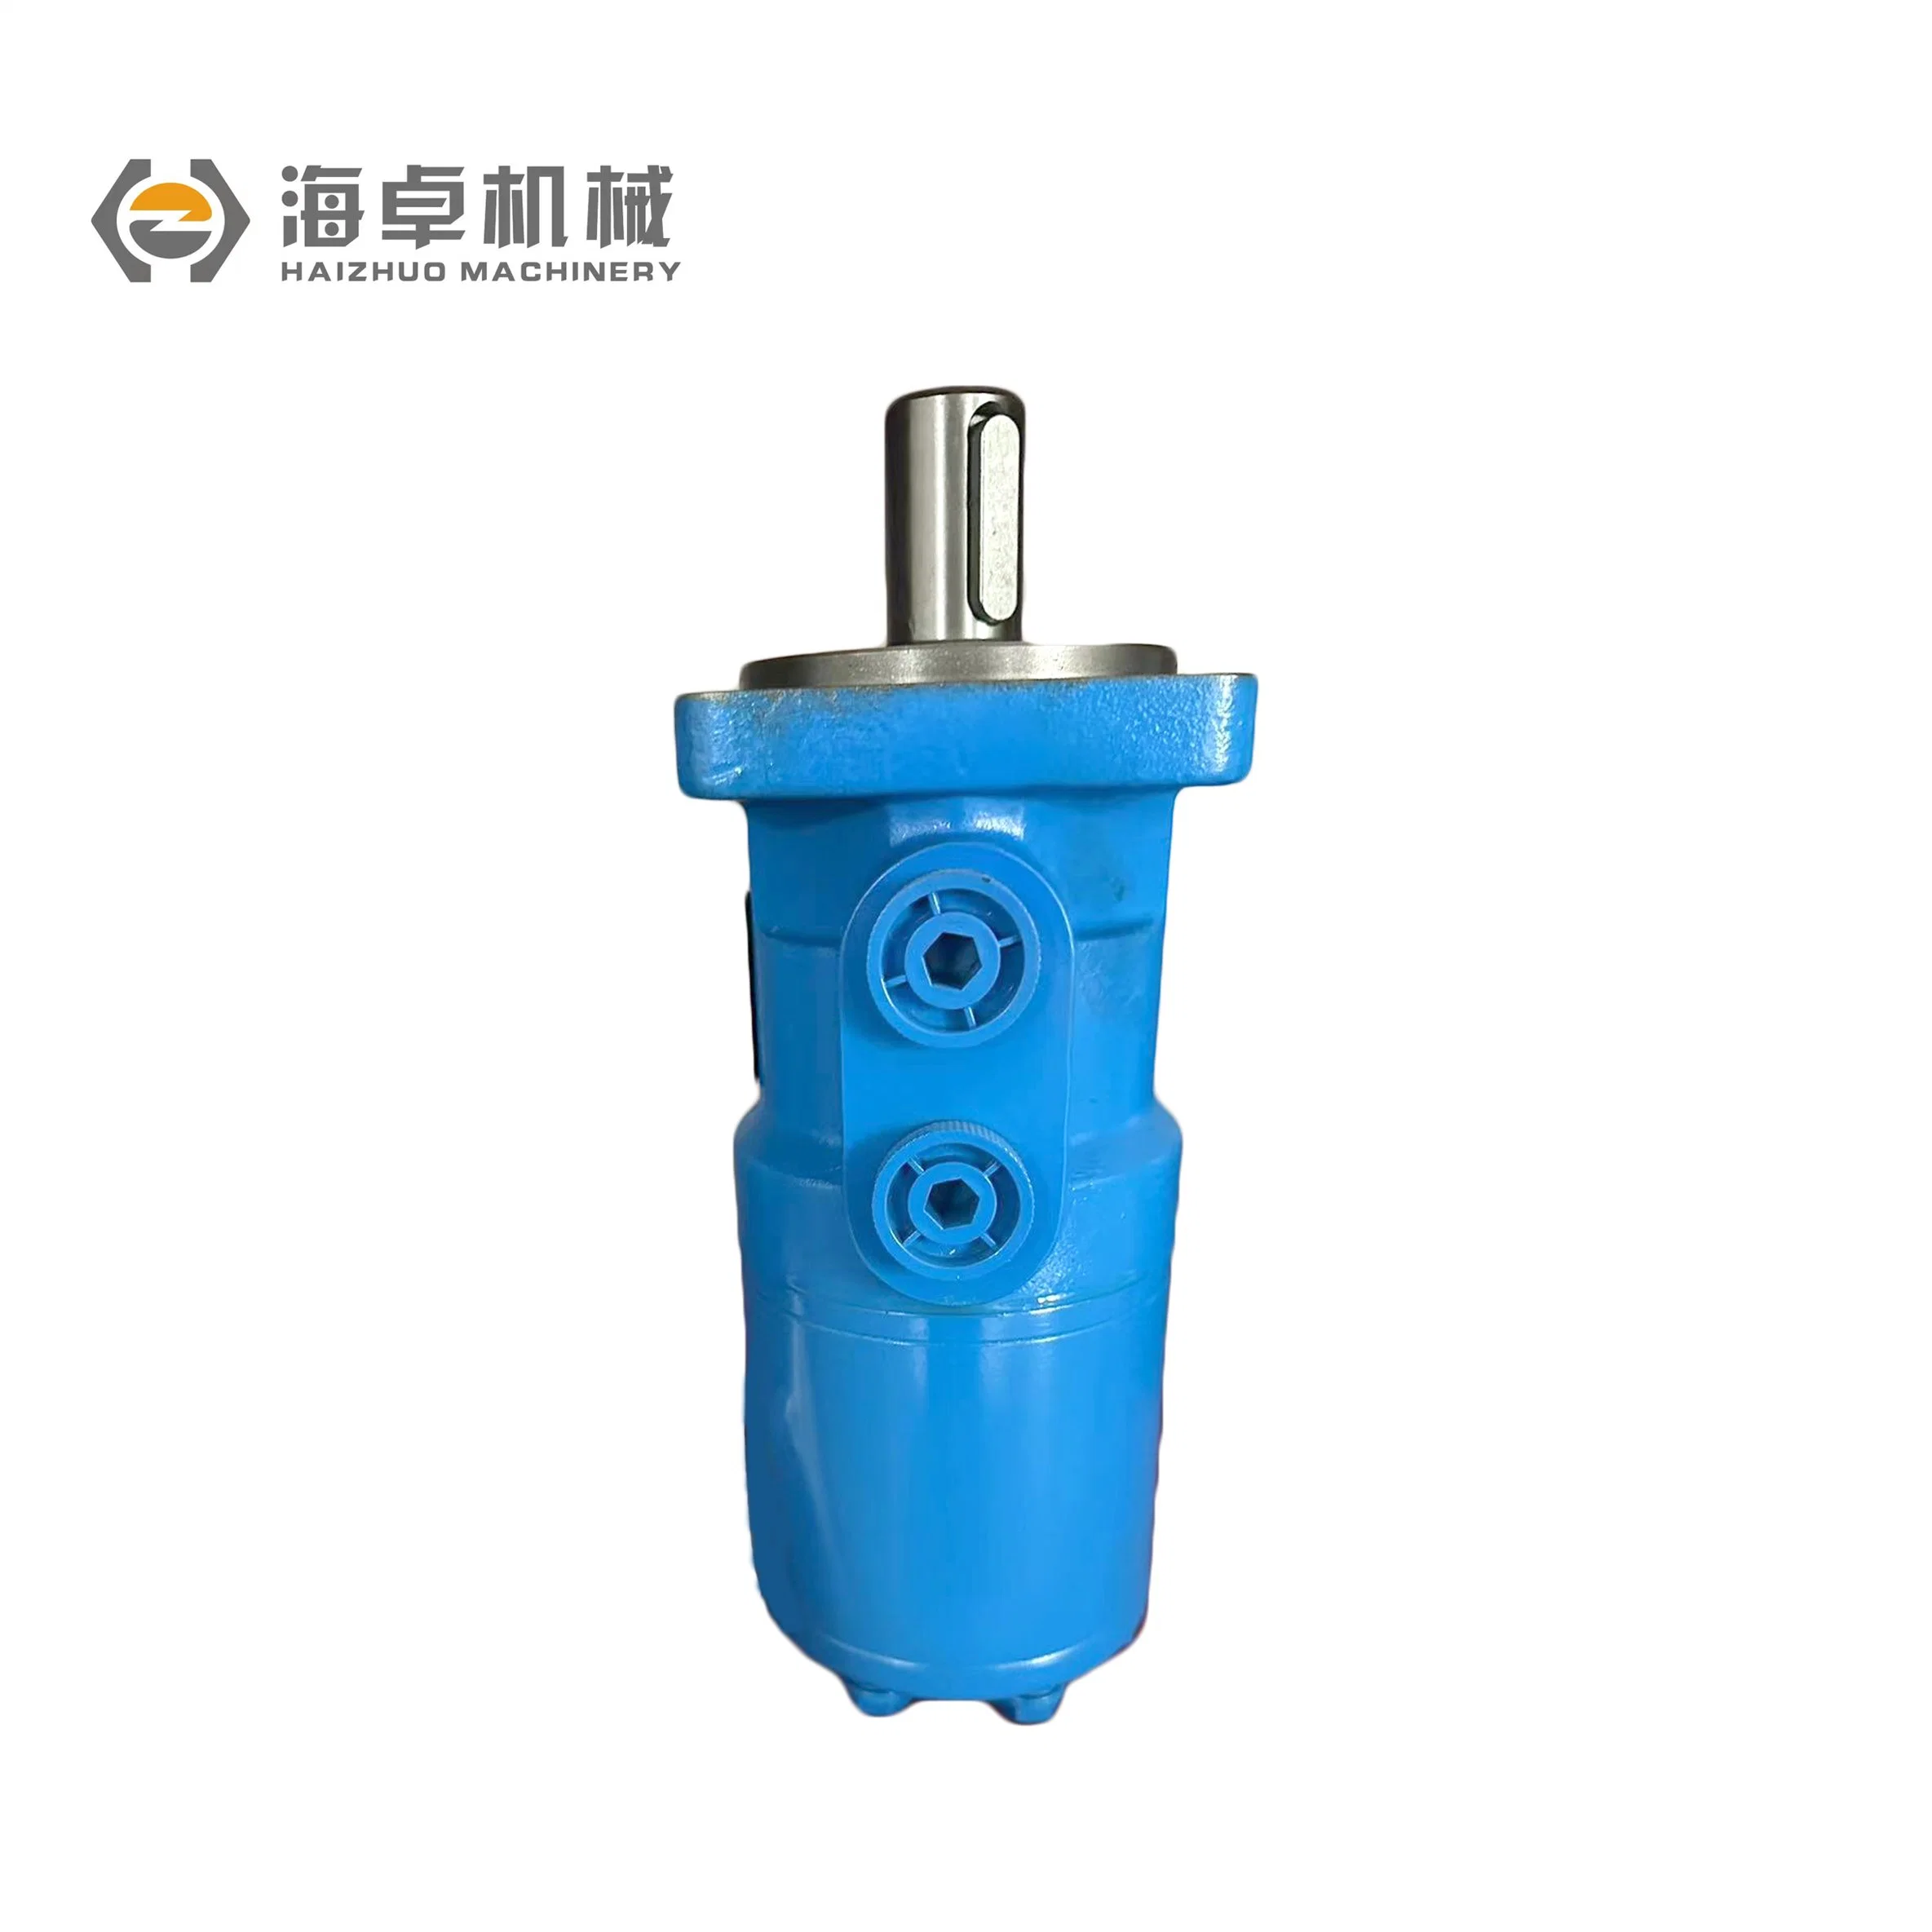 Bm2 Axial Flow Distribution Hydraulic Cycloid Motor, for Petroleum& Special Vehicles